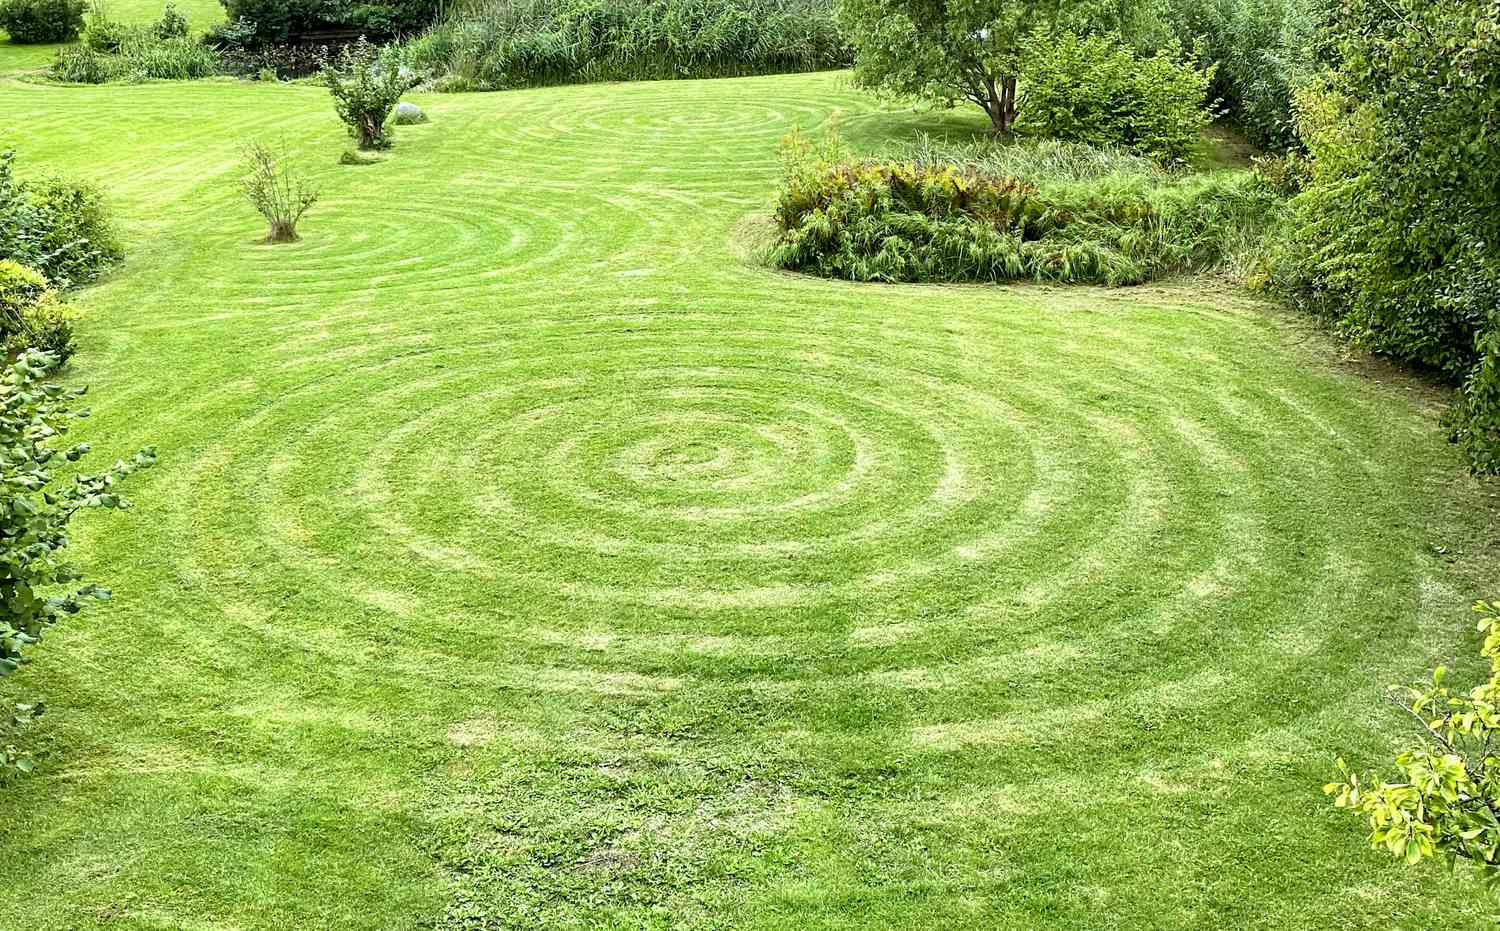 How To Cut Patterns In Grass